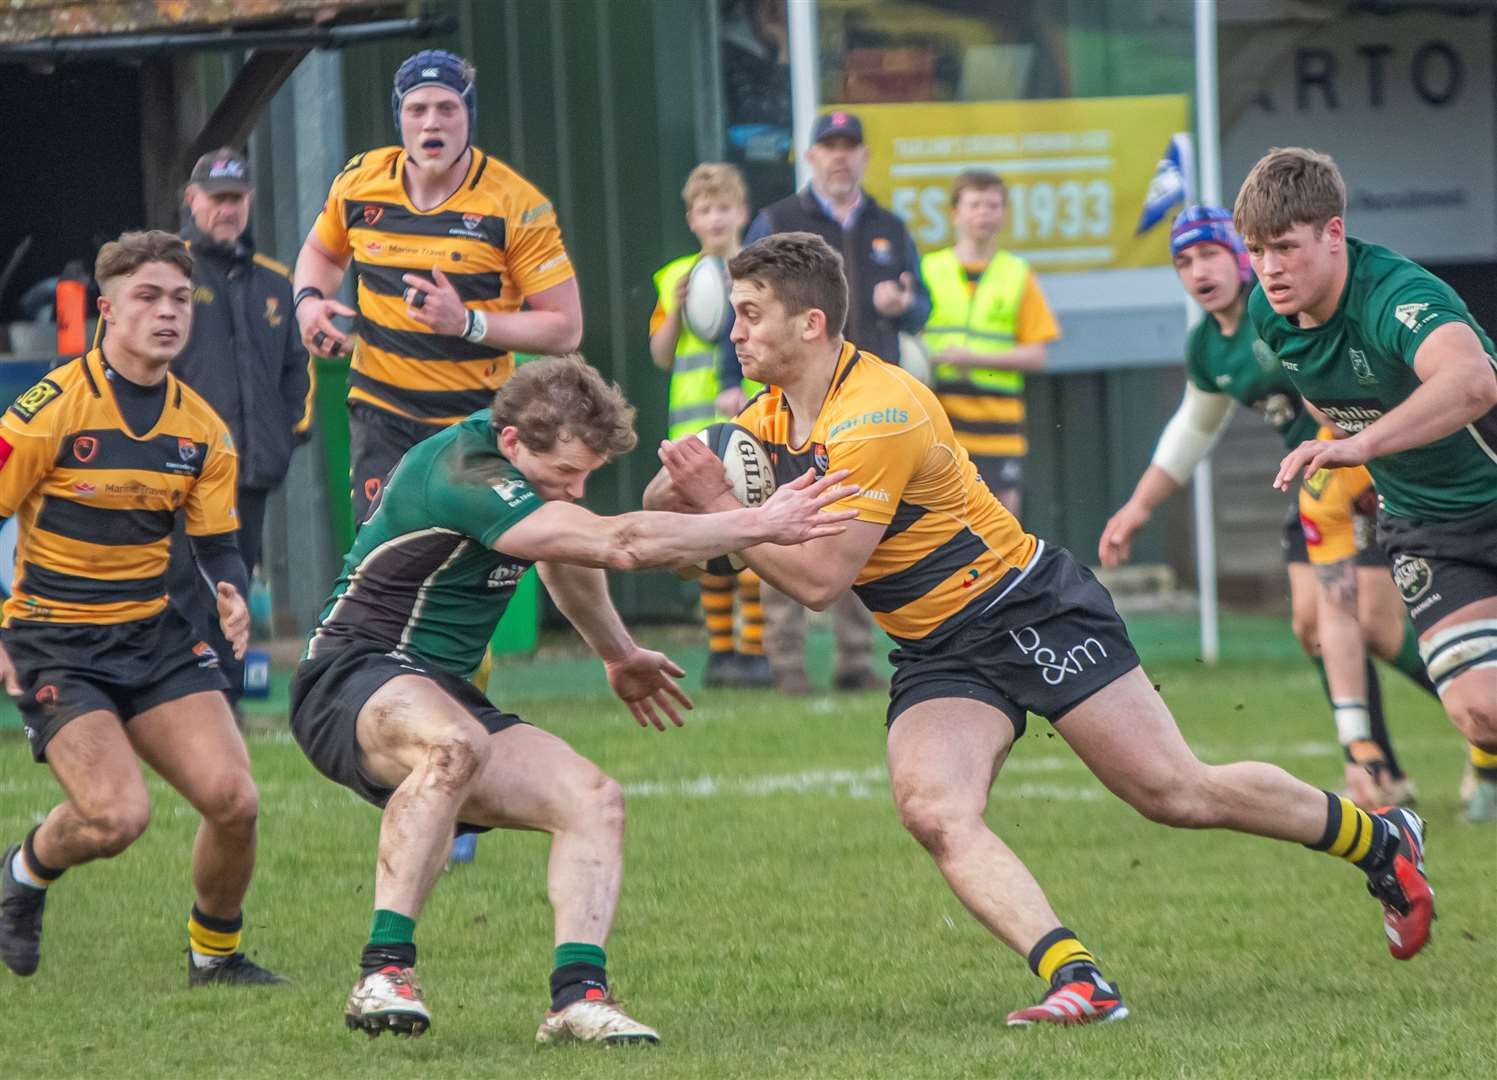 Canterbury’s Will Waddington on the charge against North Walsham. Picture: Phillipa Hilton